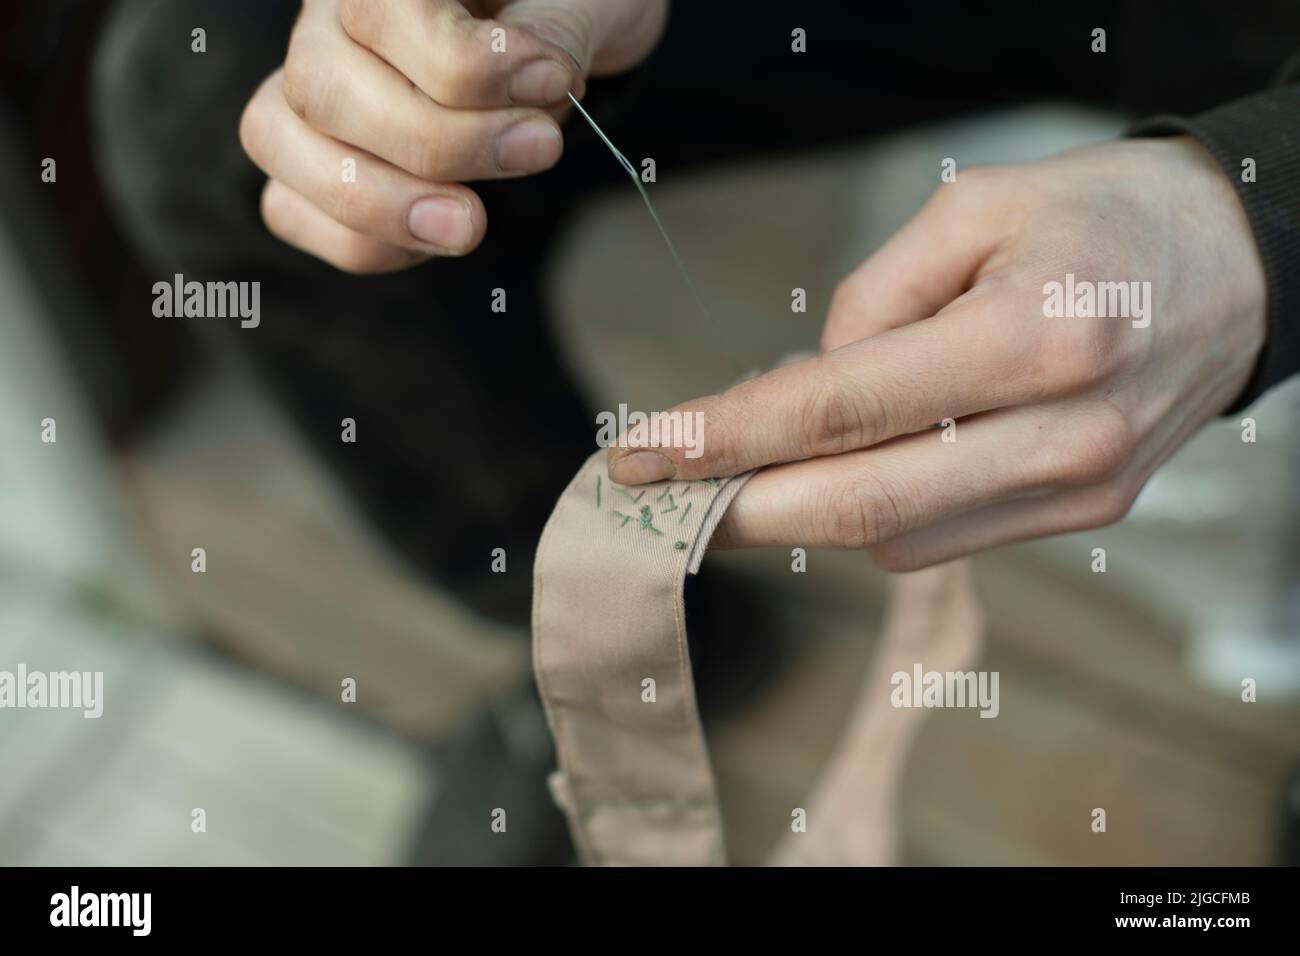 Sewing tape. Collar stitching in army. Work of weaver. Repair clothes with your own hands. Stock Photo